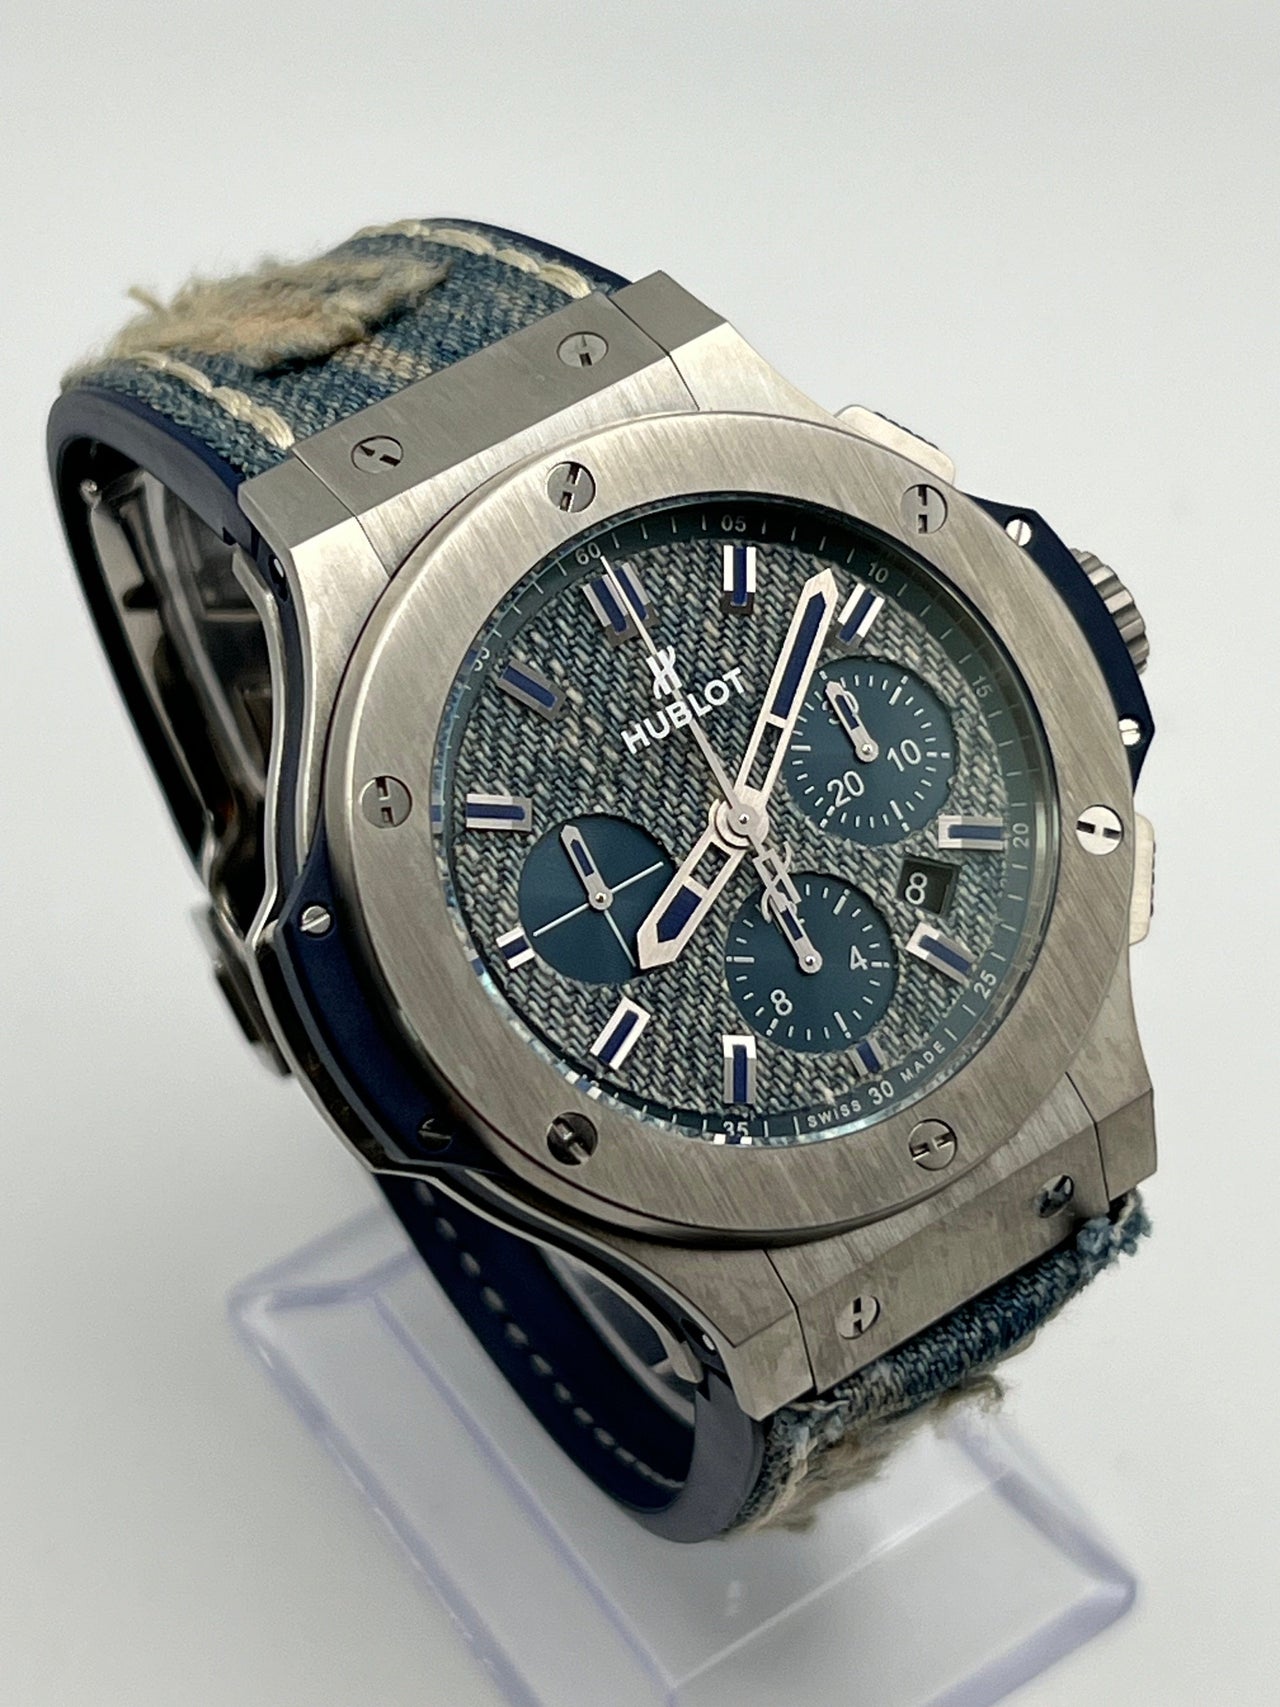 Hublot Big Bang "Jeans" Chronograph 301.SL.2770.NR.JEANS Stainless Steel Limited Edition (2015)